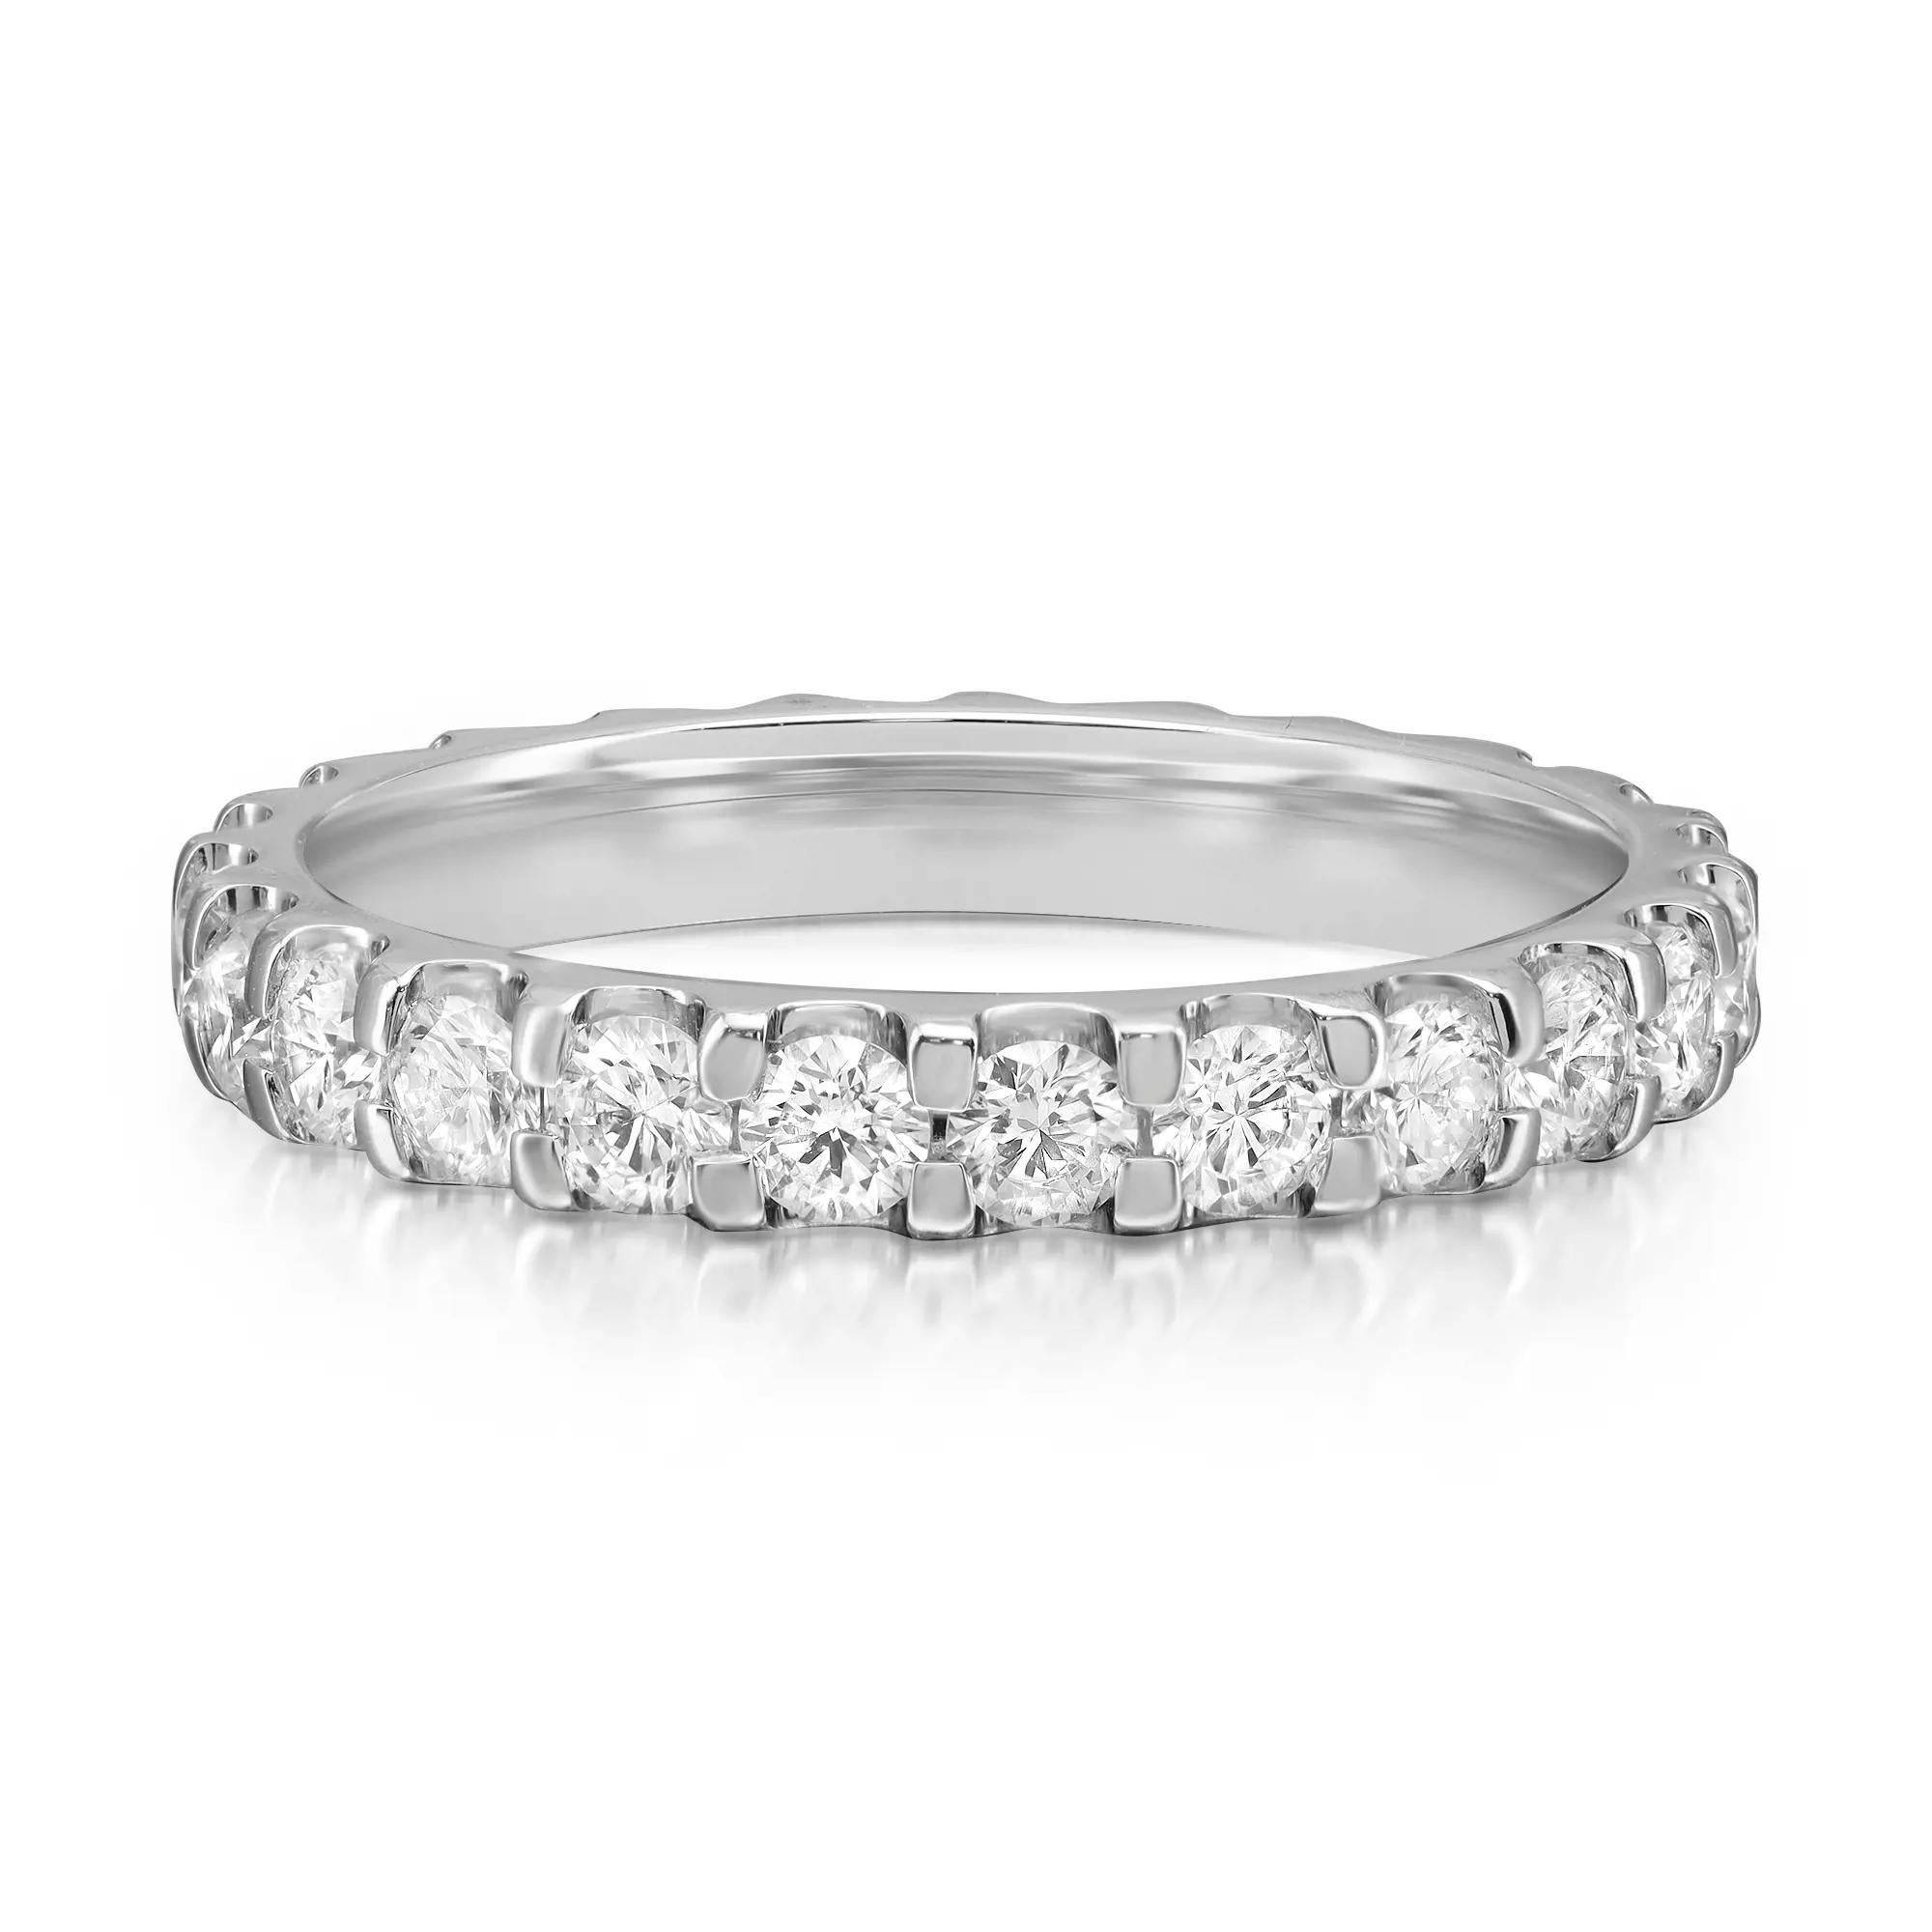 This classic diamond eternity band ring makes a standout addition to your jewelry collection. It features 24 prong set round brilliant cut sparkling diamonds, crafted in 14K white gold. Total diamond weight: 1.50 carats. Diamond quality: color H-I